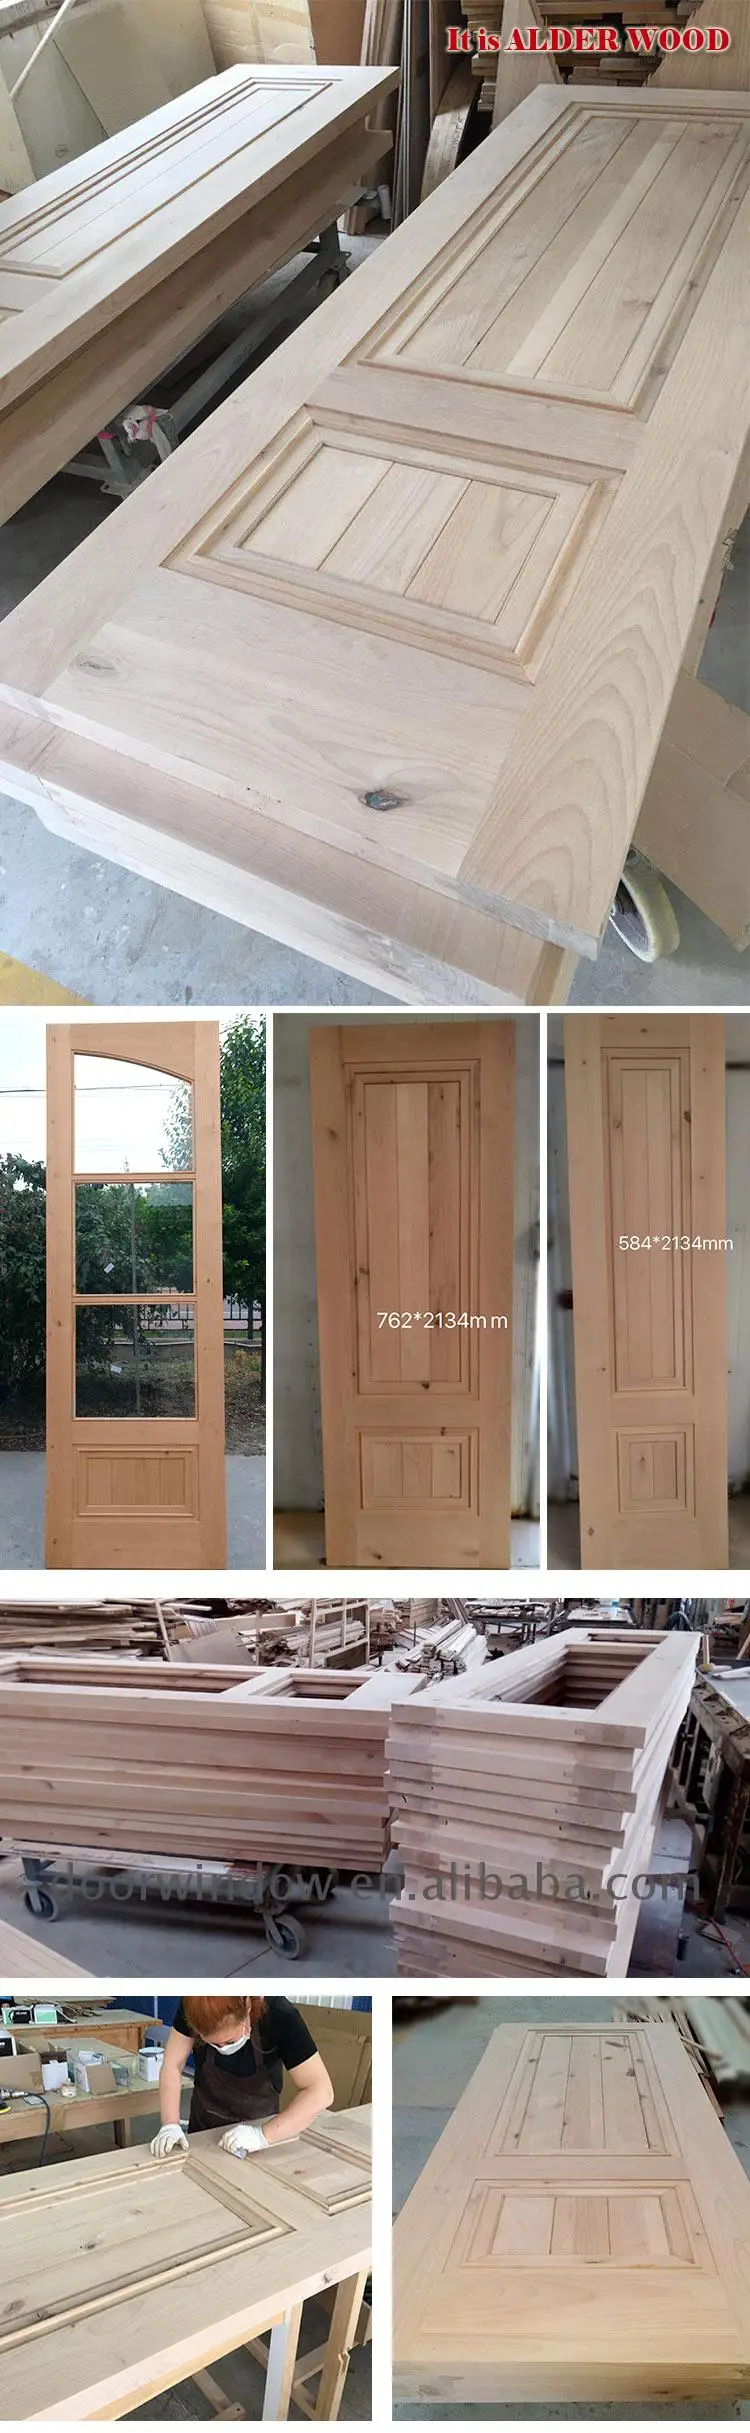 Factory price newest simpson interior doors shop replacement lowes